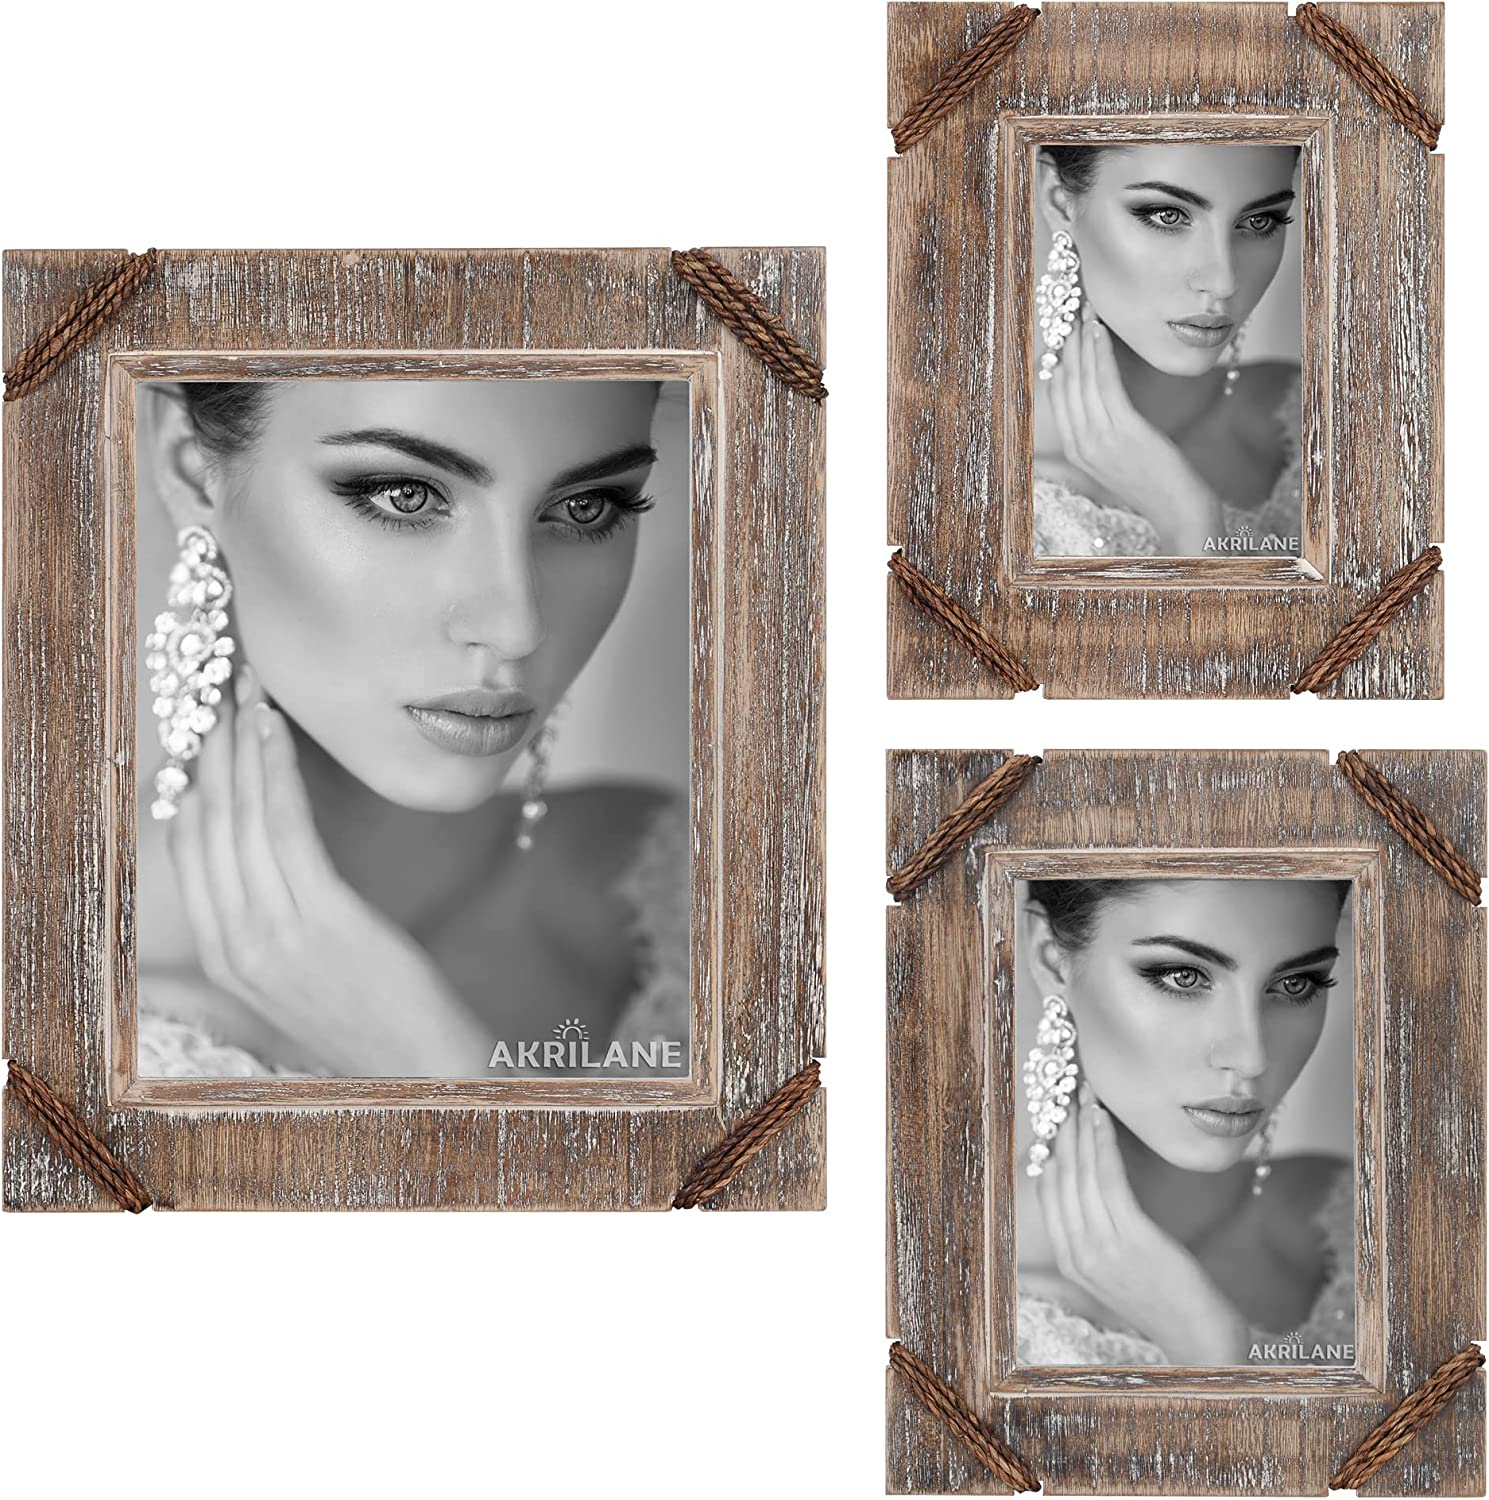 AKRILANE – Wooden Picture Stylish Frame - Vintage and Rusty Look Style Photo Frame for Wall Mount & Wall Handing - Table Top Stand Display for Home Décor Wall Display - Style D - Akrilane